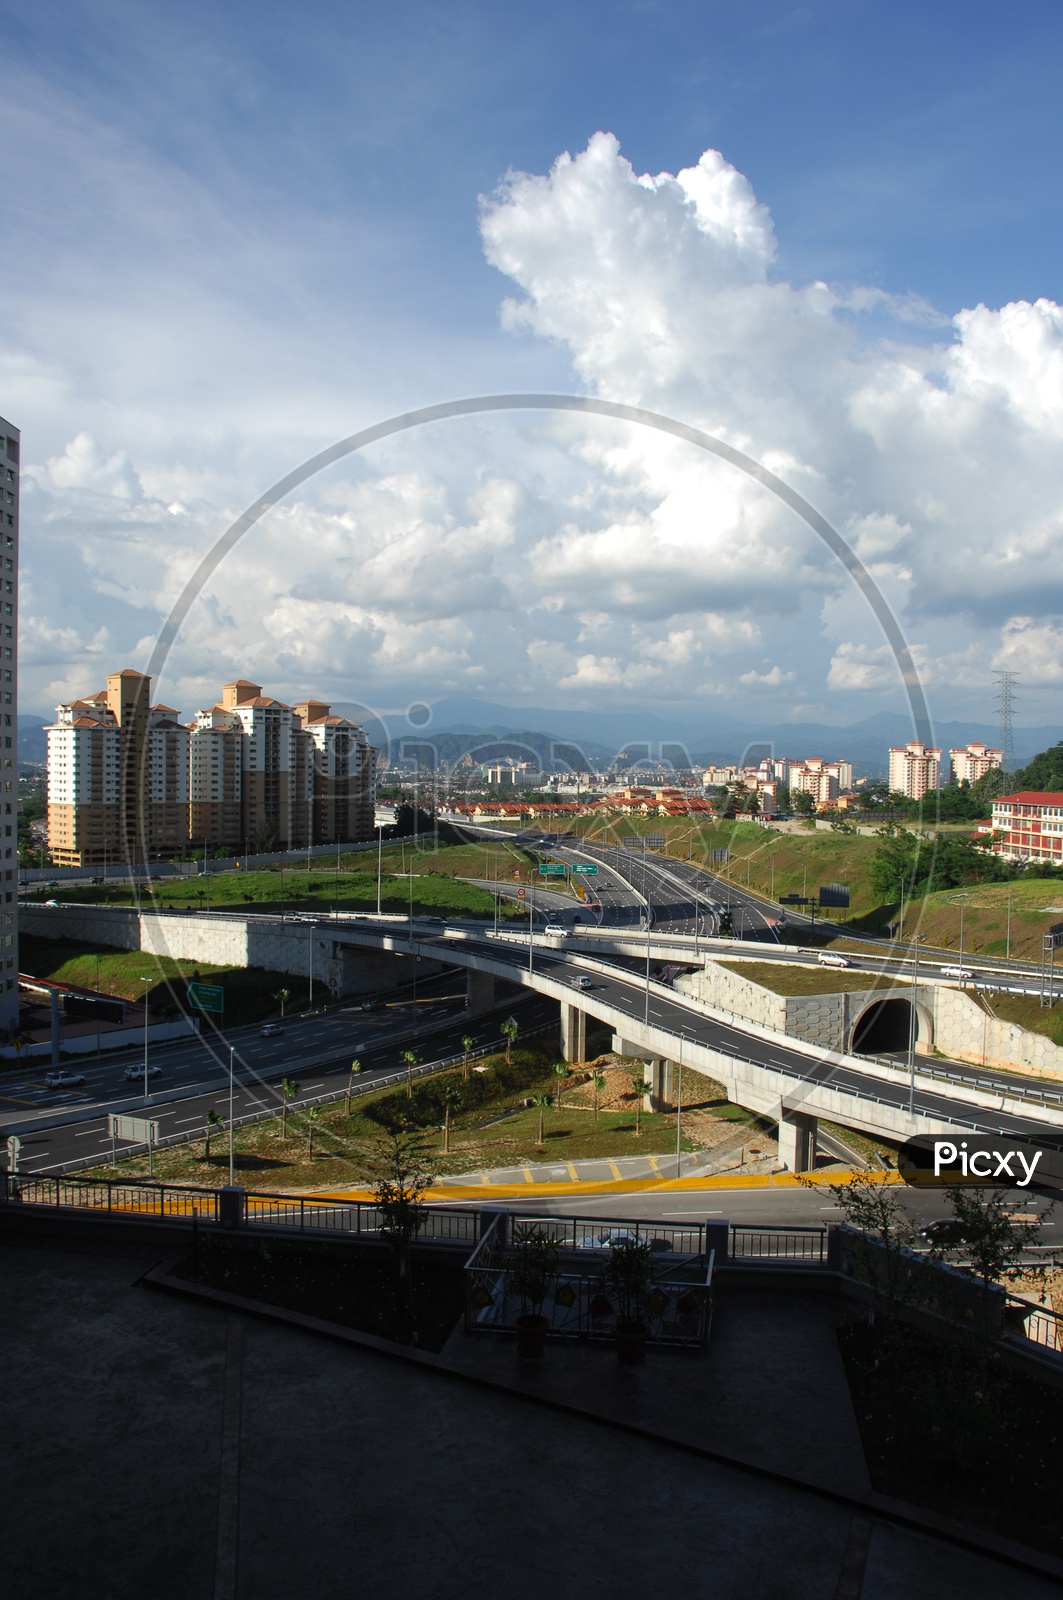 View of overpass alongside the city buildings